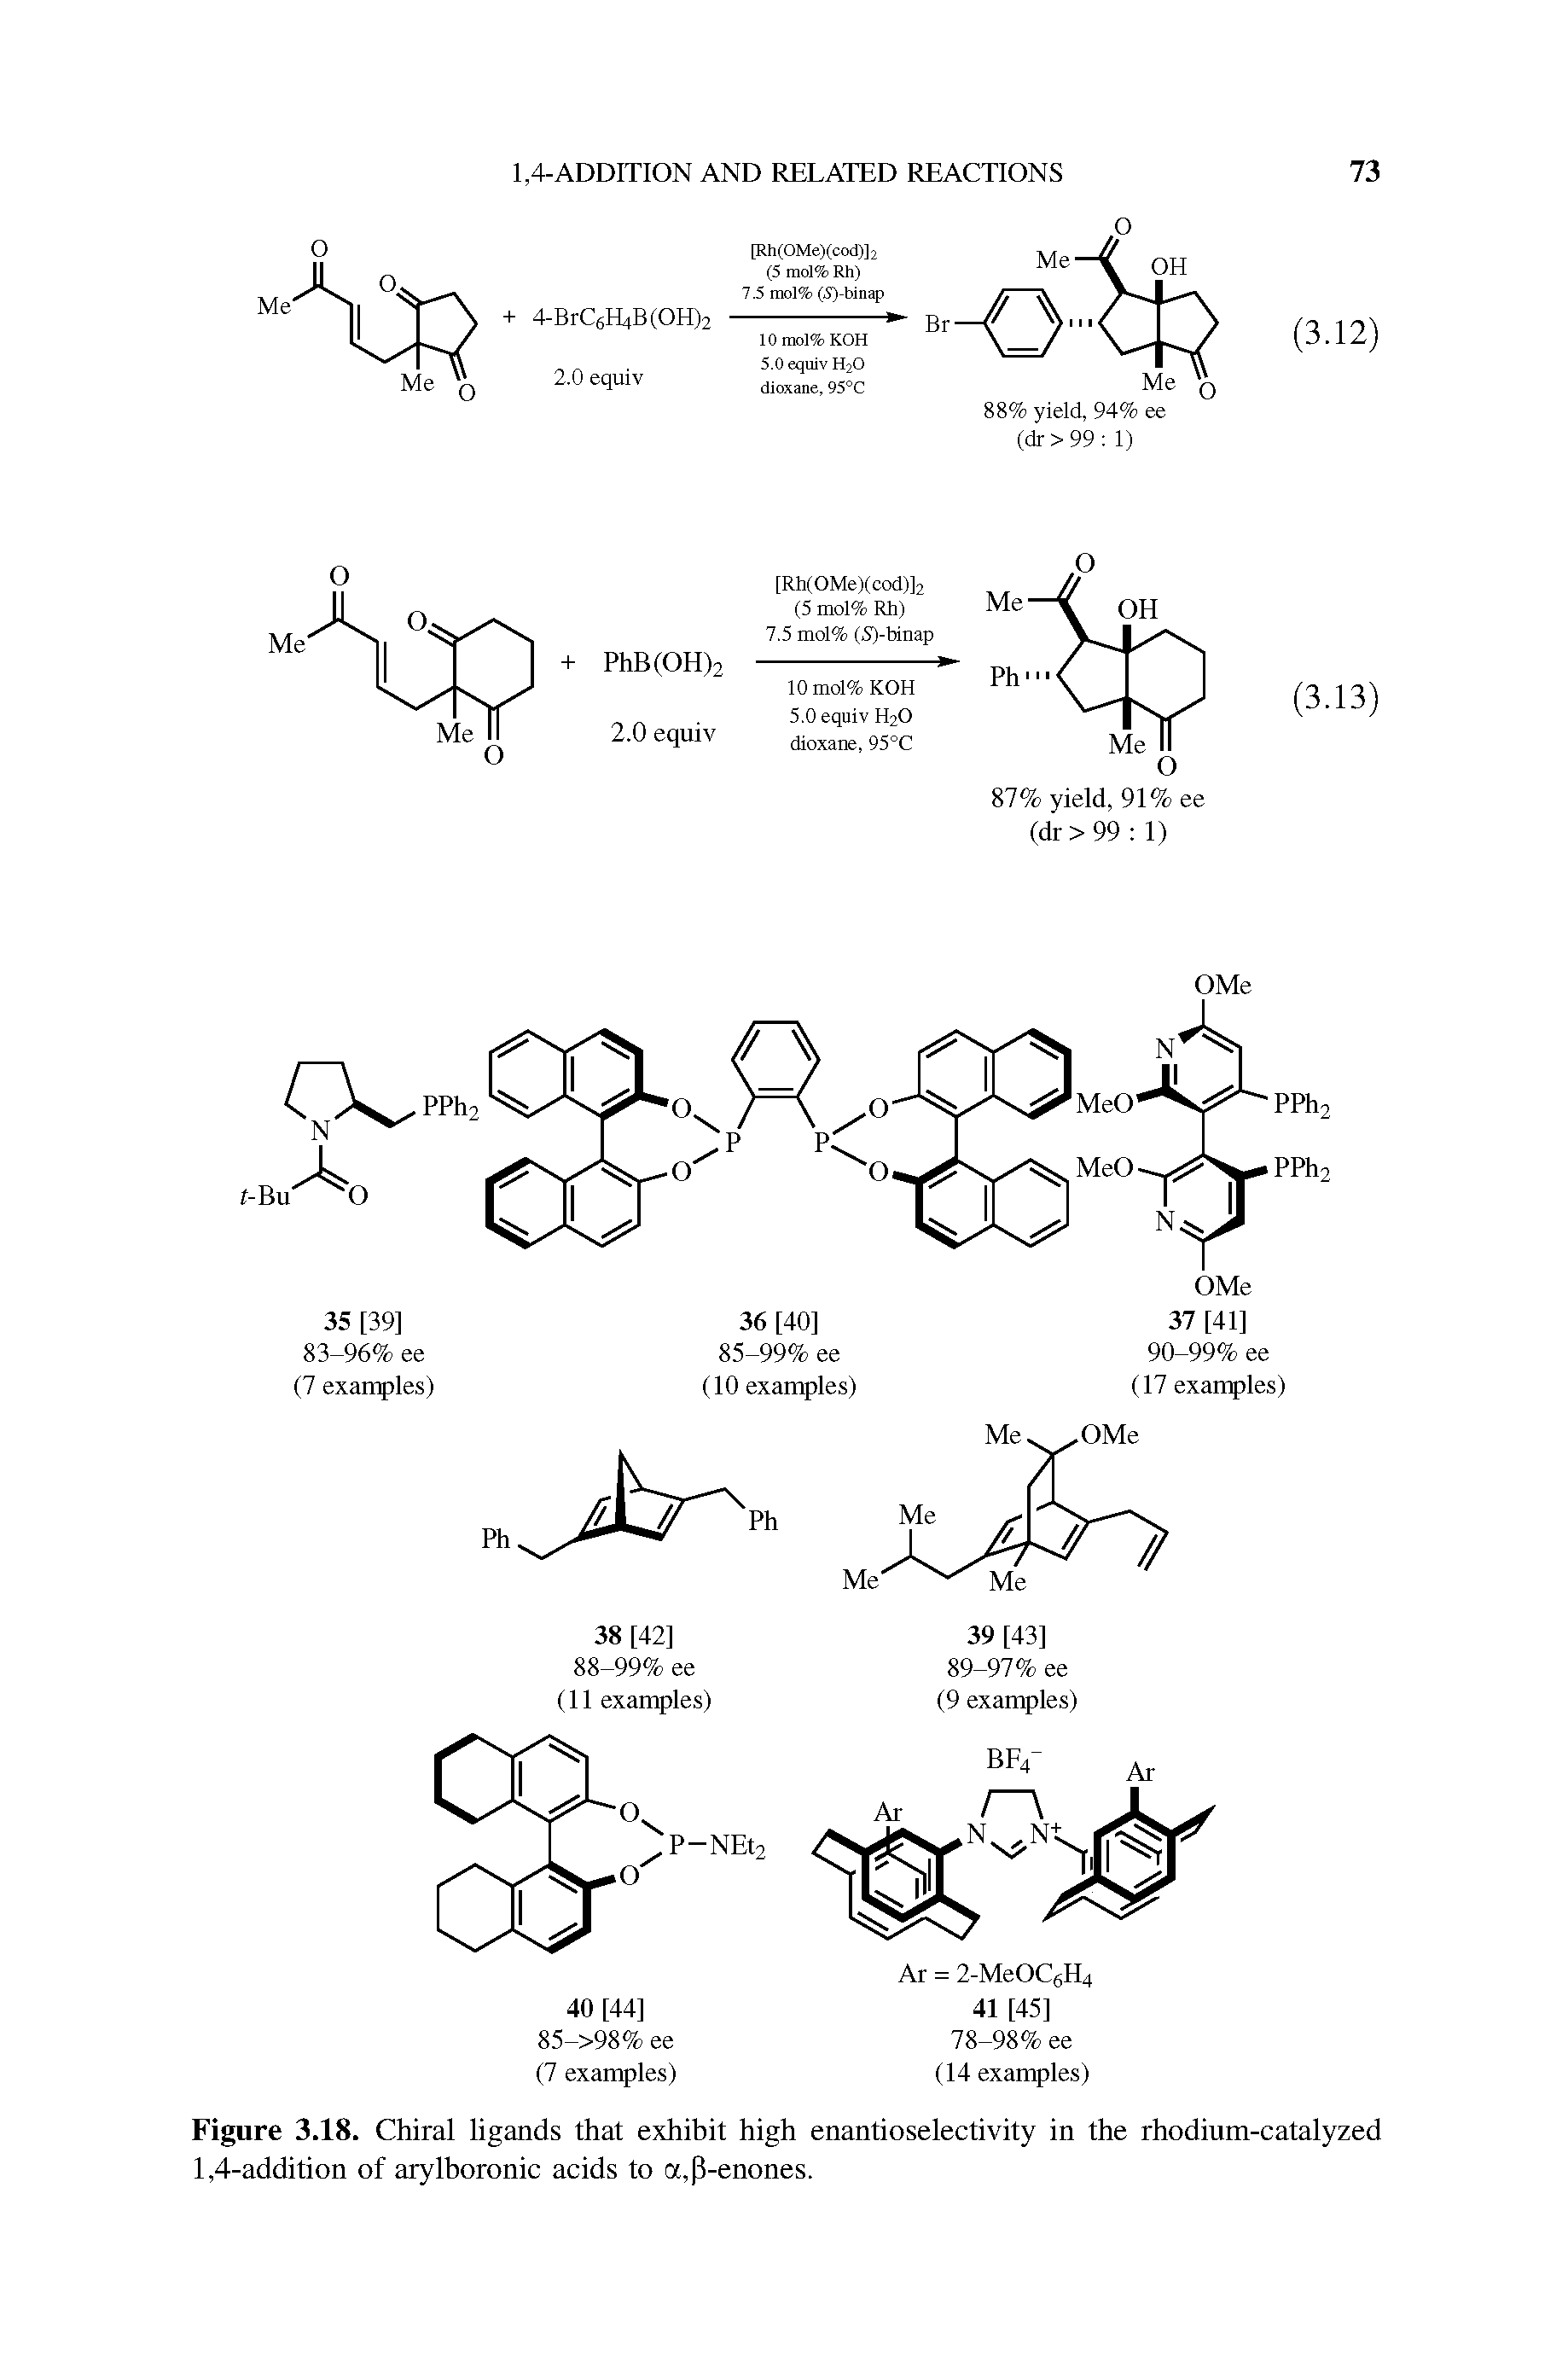 Figure 3.18. Chiral ligands that exhibit high enantioselectivity in the rhodium-catalyzed 1,4-addition of arylboronic acids to a,P-enones.